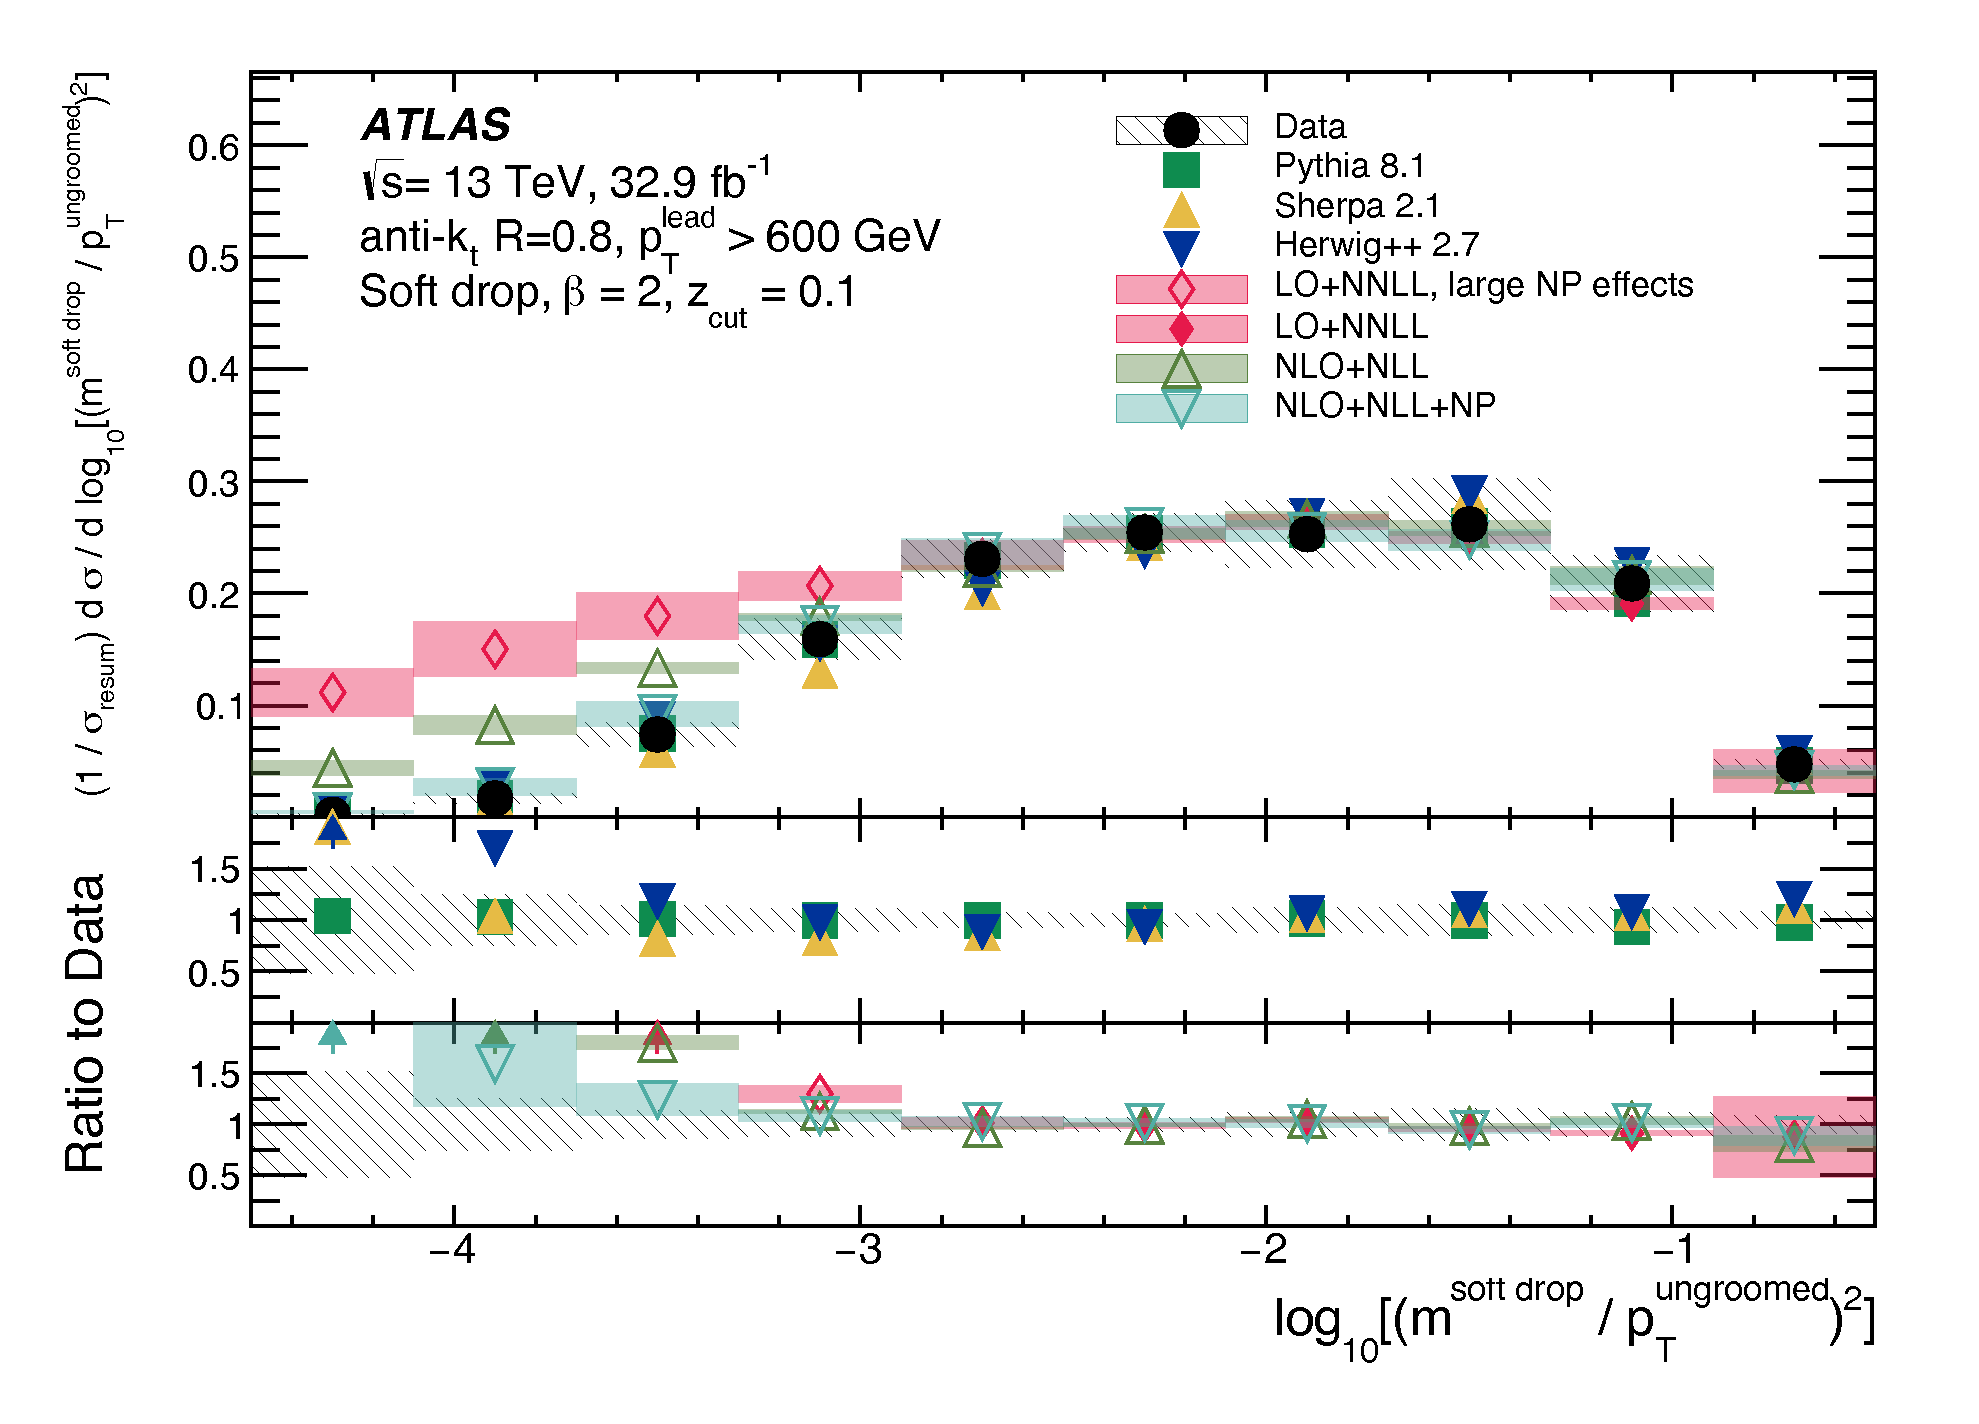 A measurement of the soft-drop jet mass in pp collisions at sqrt(s)=13 TeV with the ATLAS detector